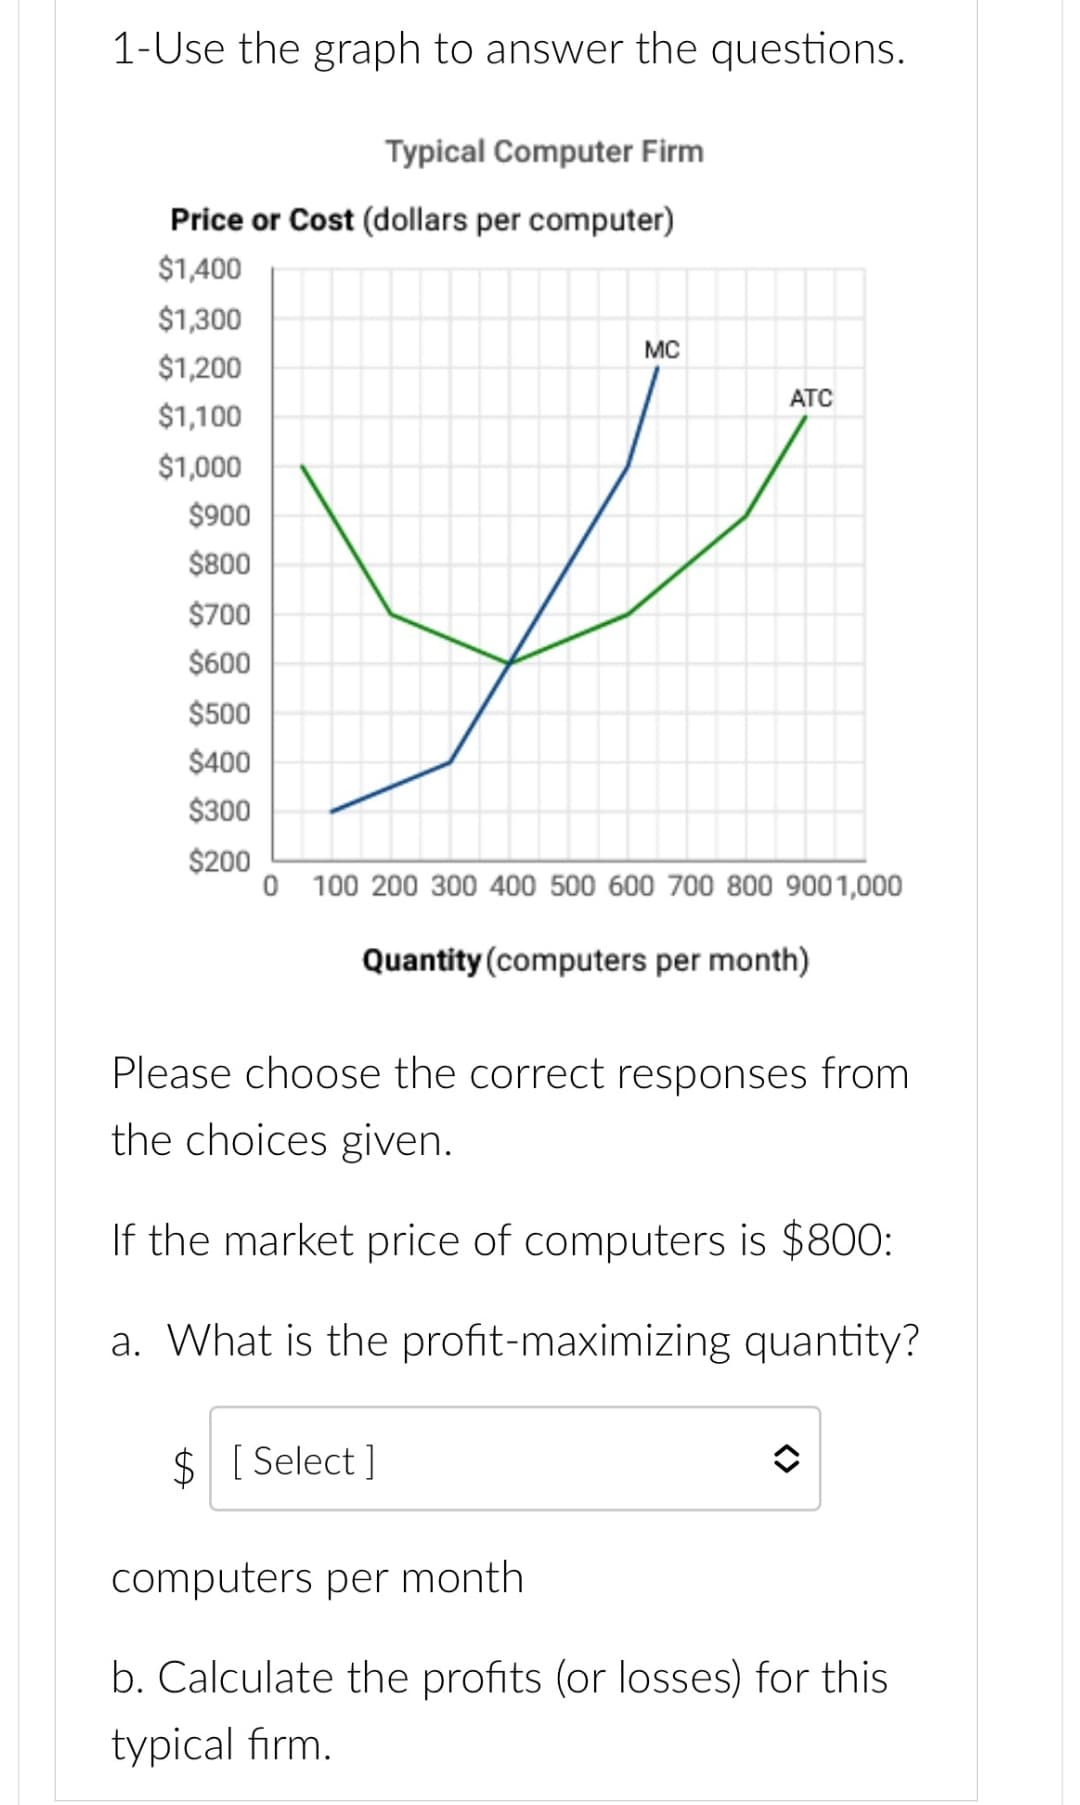 1-Use the graph to answer the questions.
Typical Computer Firm
Price or Cost (dollars per computer)
$1,400
$1,300
$1,200
$1,100
$1,000
$900
$800
$700
$600
$500
$400
$300
$200
MC
ATC
0 100 200 300 400 500 600 700 800 9001,000
Quantity (computers per month)
$ [Select]
Please choose the correct responses from
the choices given.
If the market price of computers is $800:
a. What is the profit-maximizing quantity?
computers per month
b. Calculate the profits (or losses) for this
typical firm.